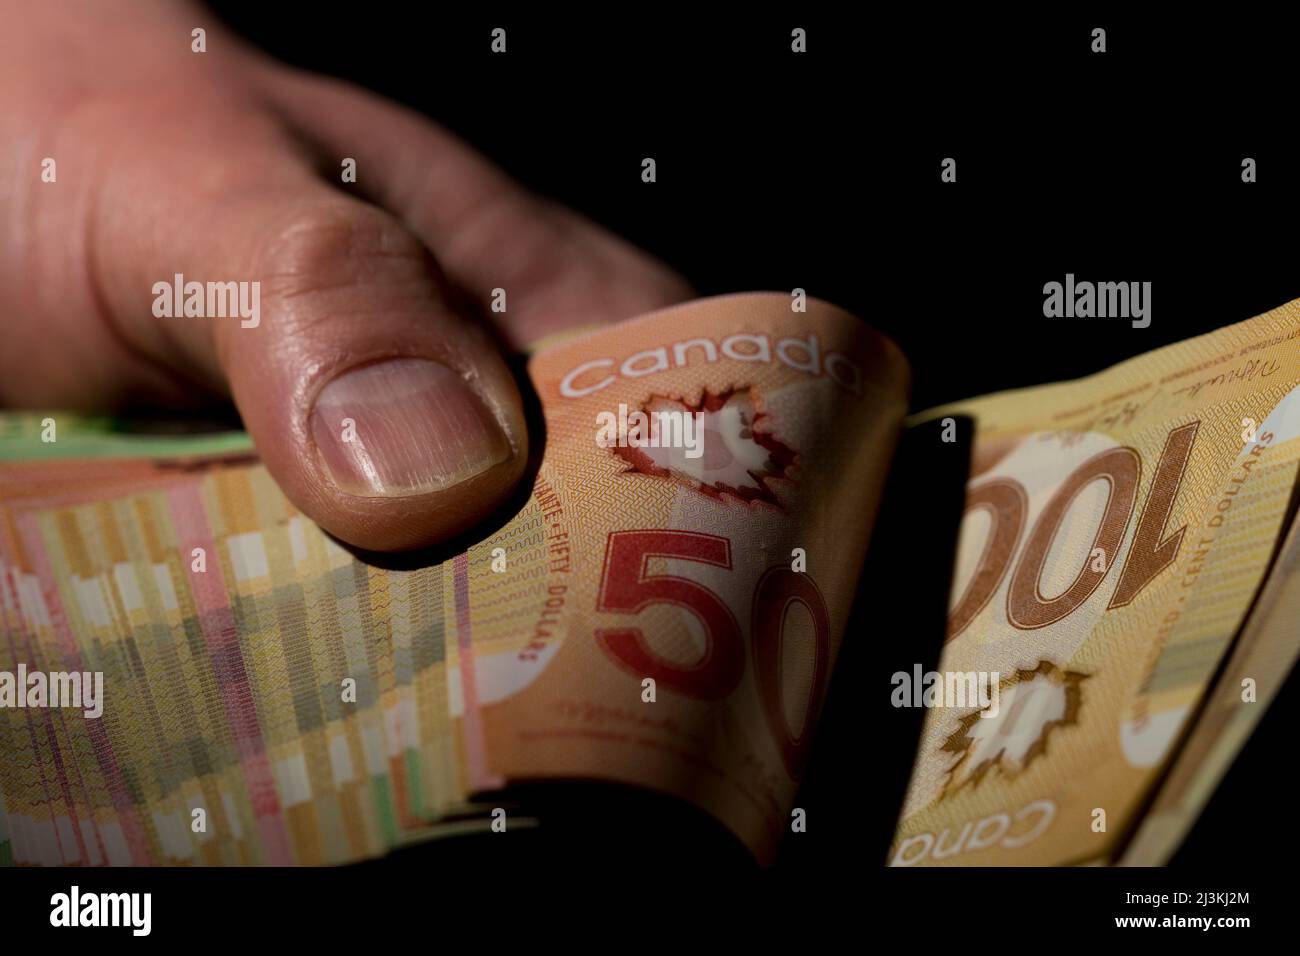 Counting money Canadian money close up. Paper cash dollar bills being counted. Stock Photo